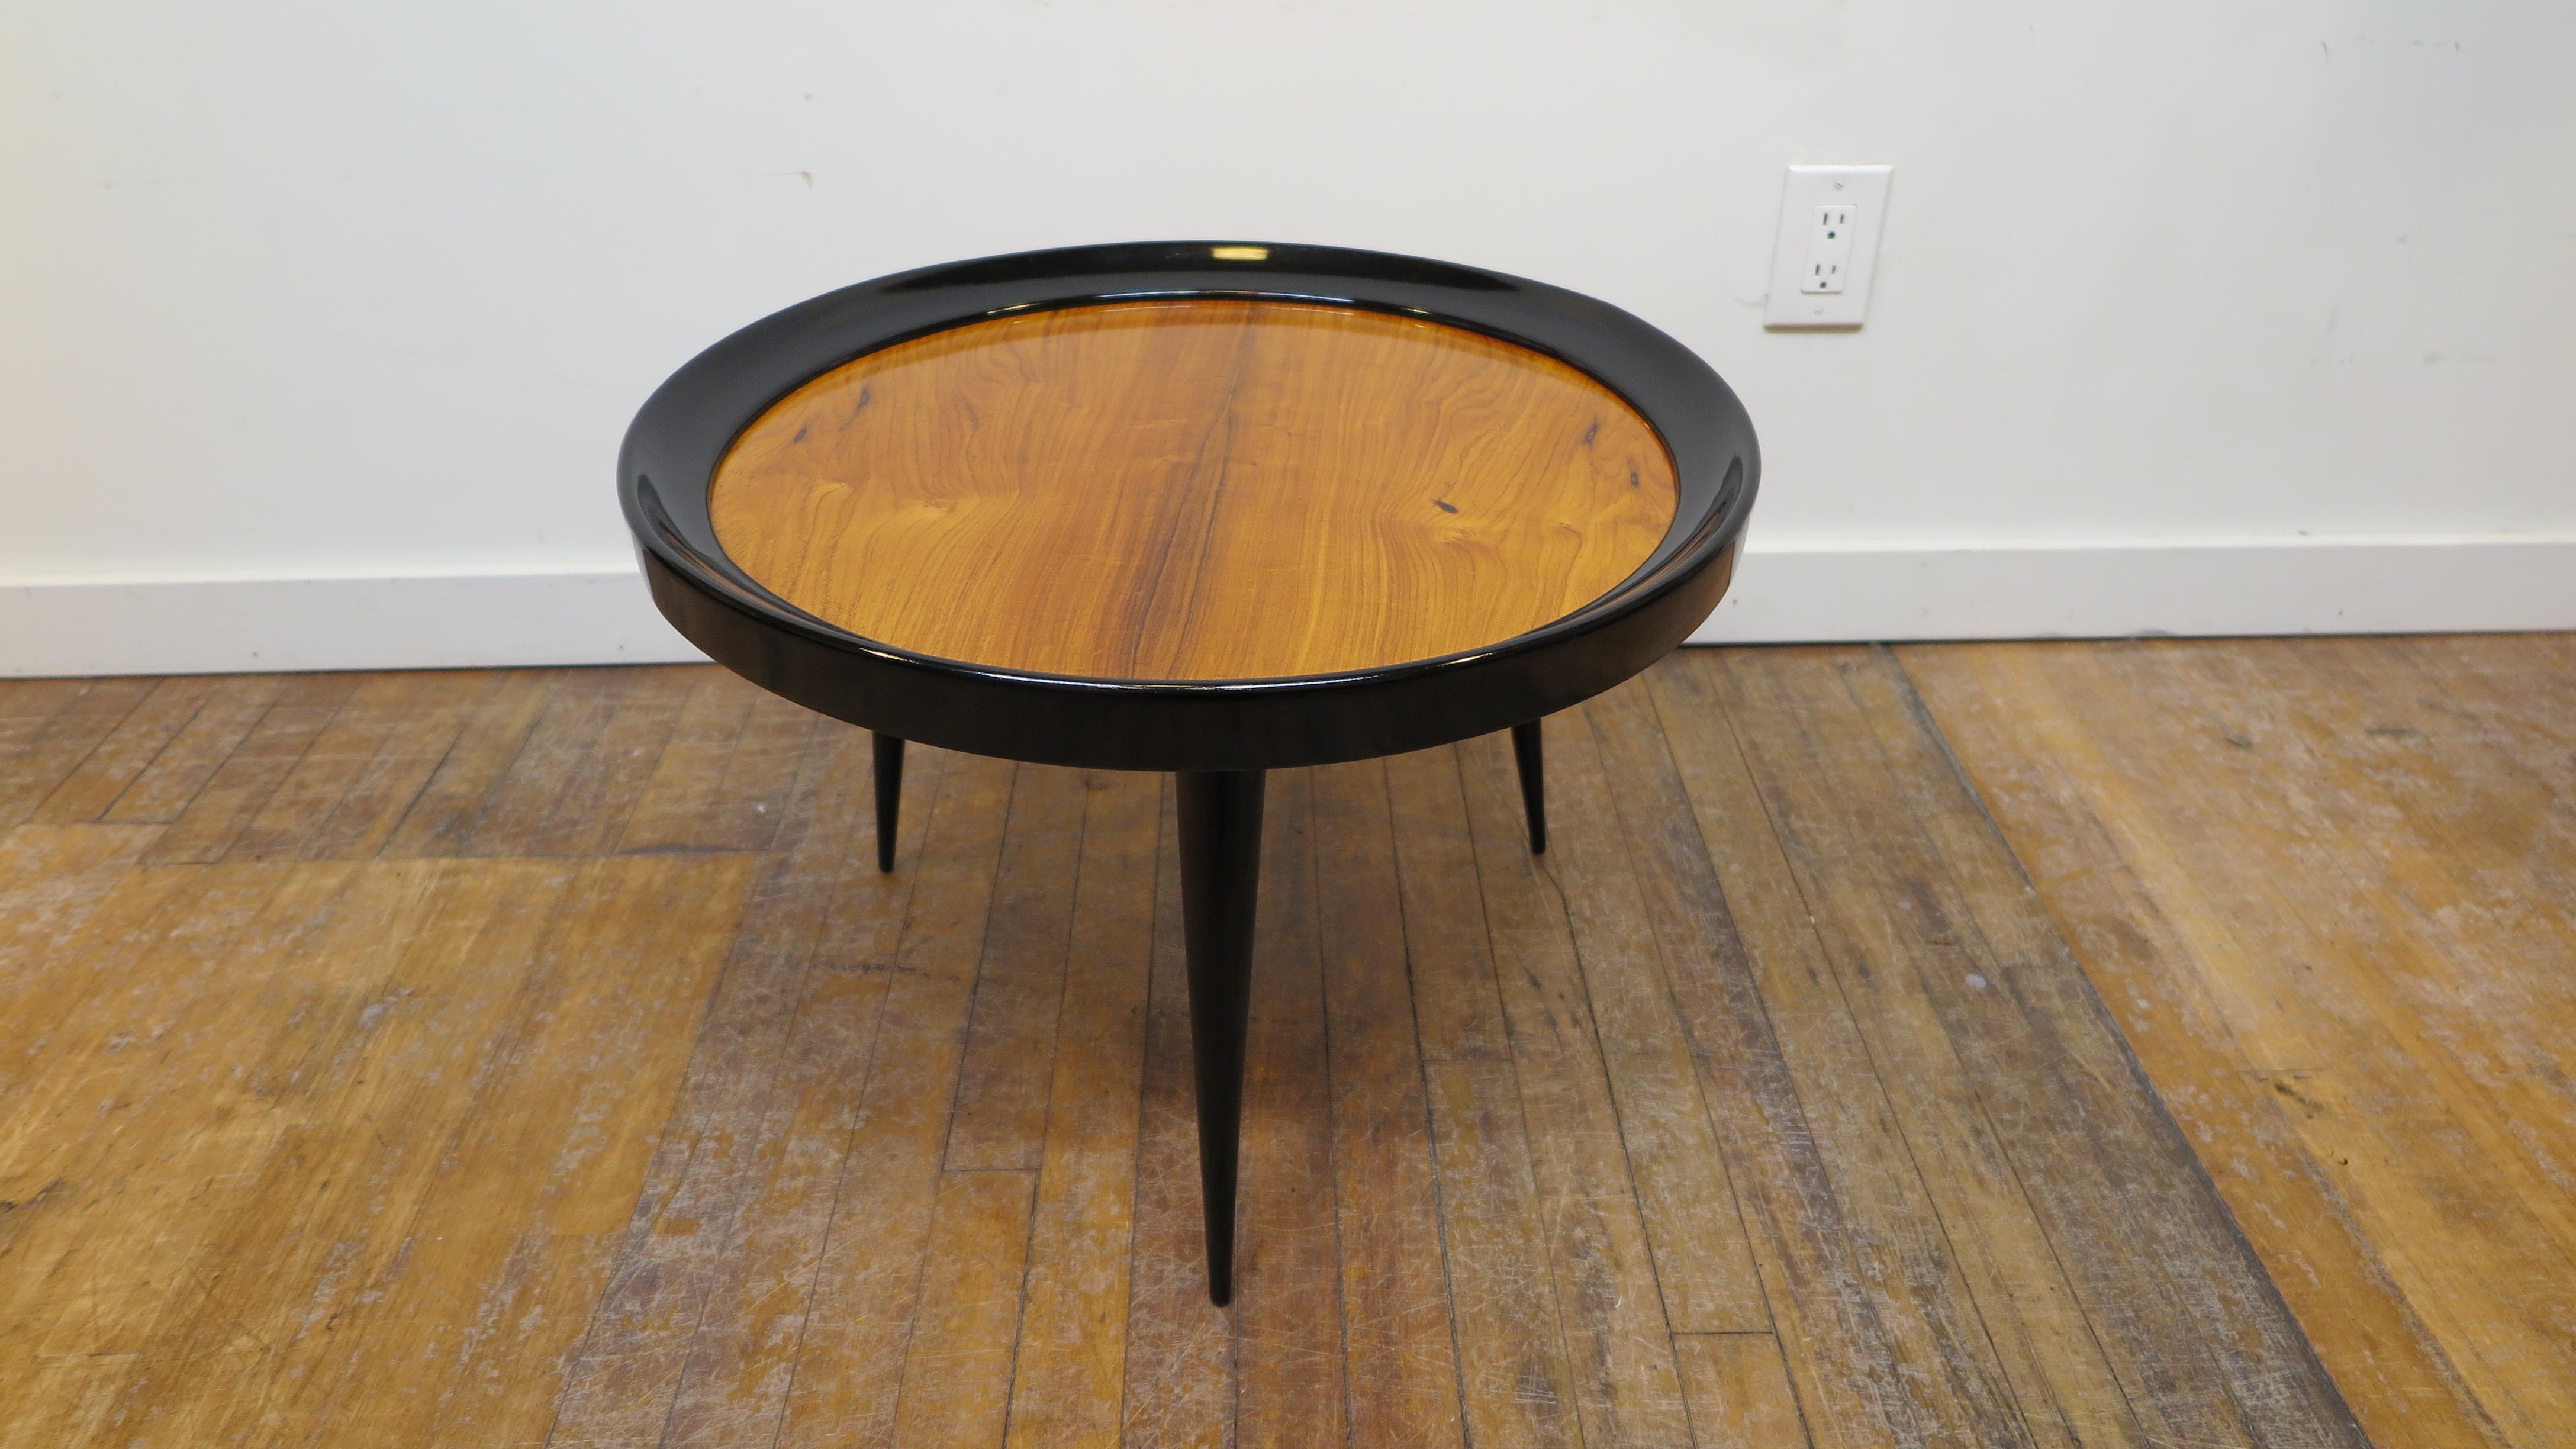 Brazilian modern coffee table side table, Martin Eisler 1913-1977. This table has been carefully restored keeping the color original enhanced by hand polishing. In very good condition. Original labels intact. Early 1950s Brazil Sao Paulo, Móveis E